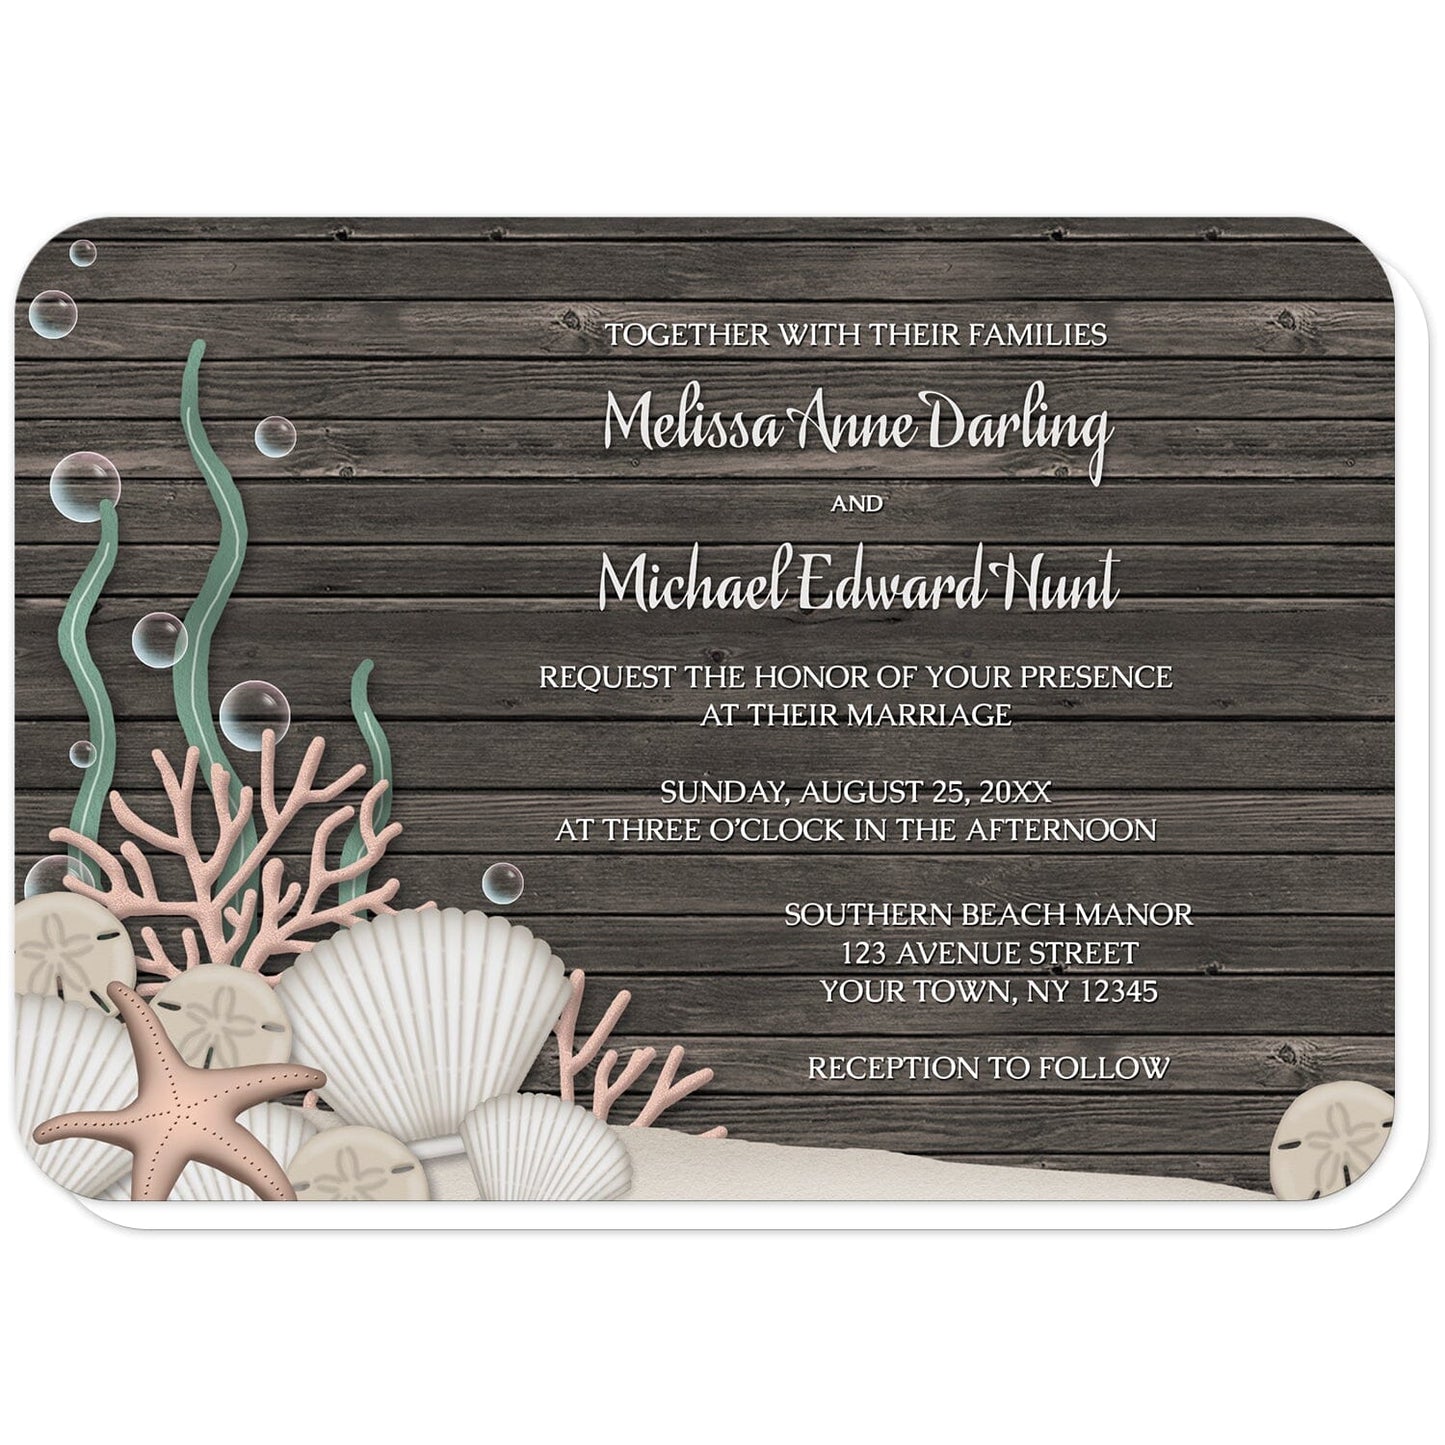 Rustic Beach Seashells and Wood Wedding Invitations (with rounded corners) at Artistically Invited. Rustic beach seashells and wood wedding invitations with a rustic "on the beach" or "under the sea" theme. They are designed with a dark wood pattern, sandy seabed, assorted seashells, coral, and kelp. Your personalized marriage celebration details are custom printed in white over the wood background.